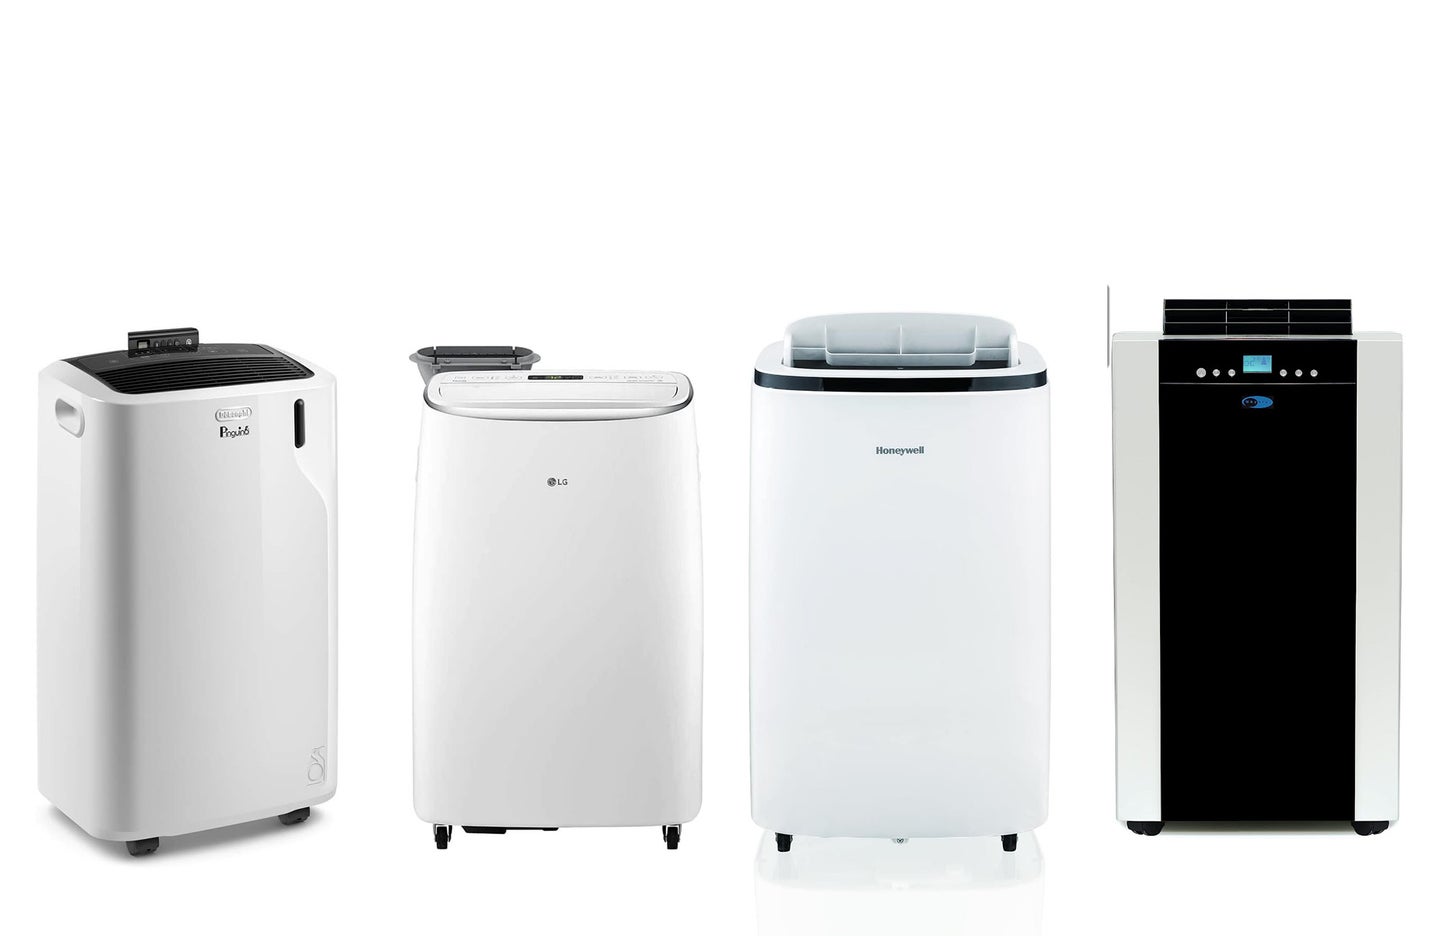 Keep your home cool and save energy with one of the best portable air conditioners.